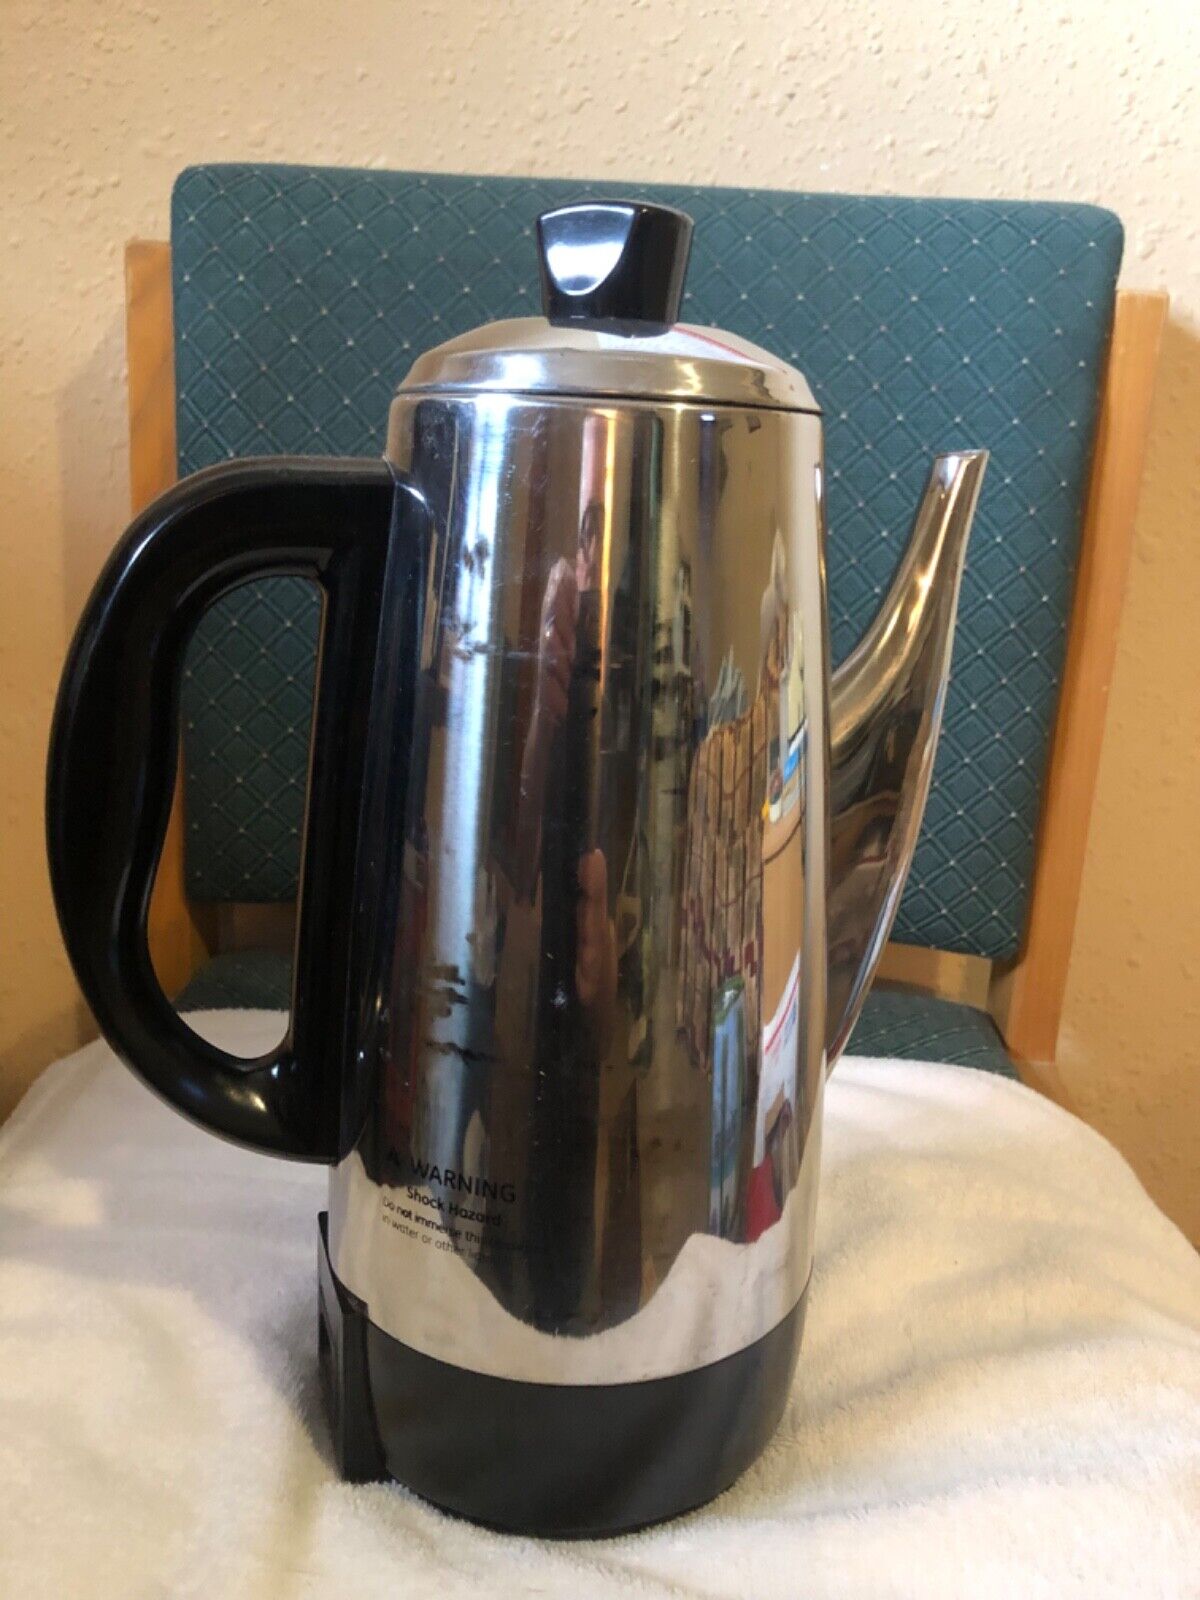 HAMILTON BEACH 12 CUP ELECTRIC PERCOLATOR COFFEE POT #40616 STAINLESS STEEL